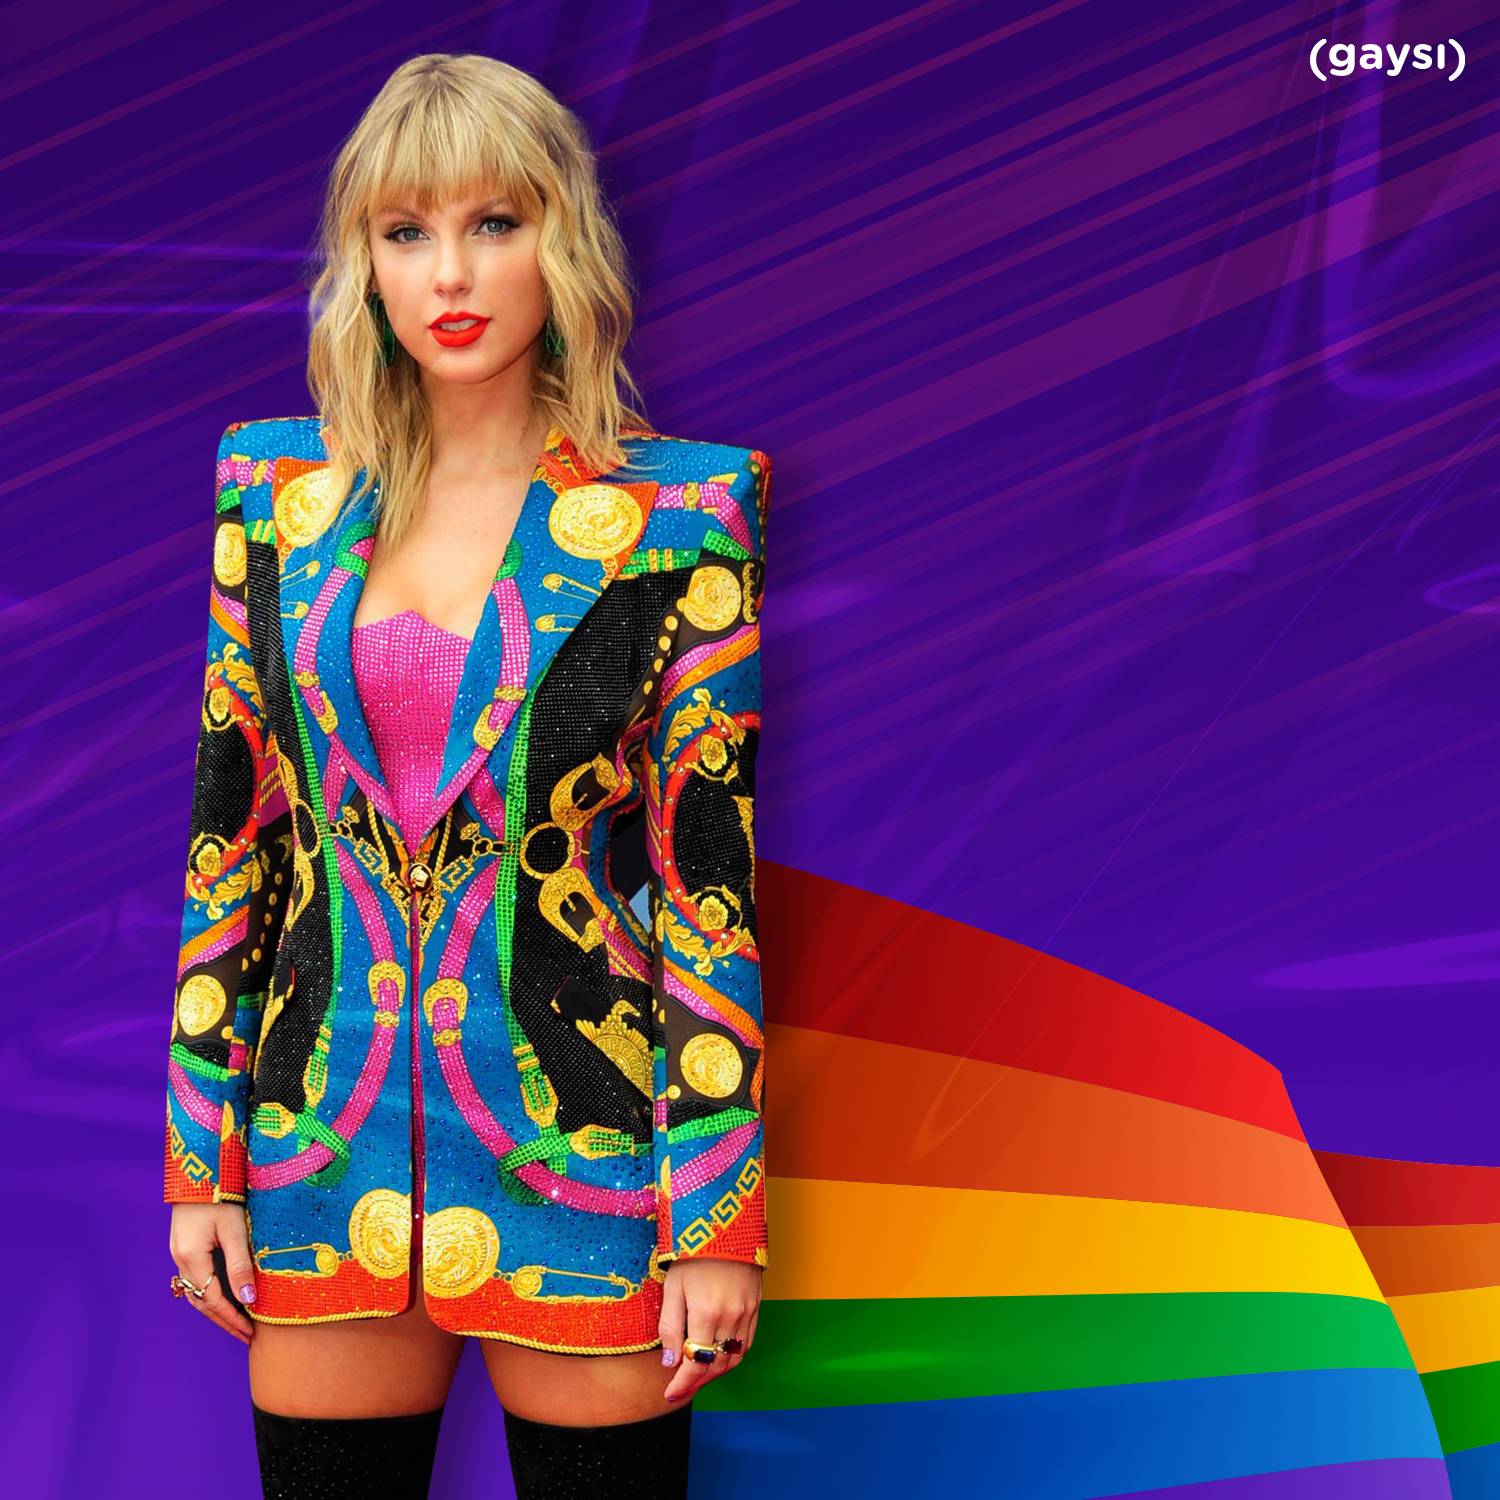 The Queerification Of Taylor Swift: From Fearless To Folklore